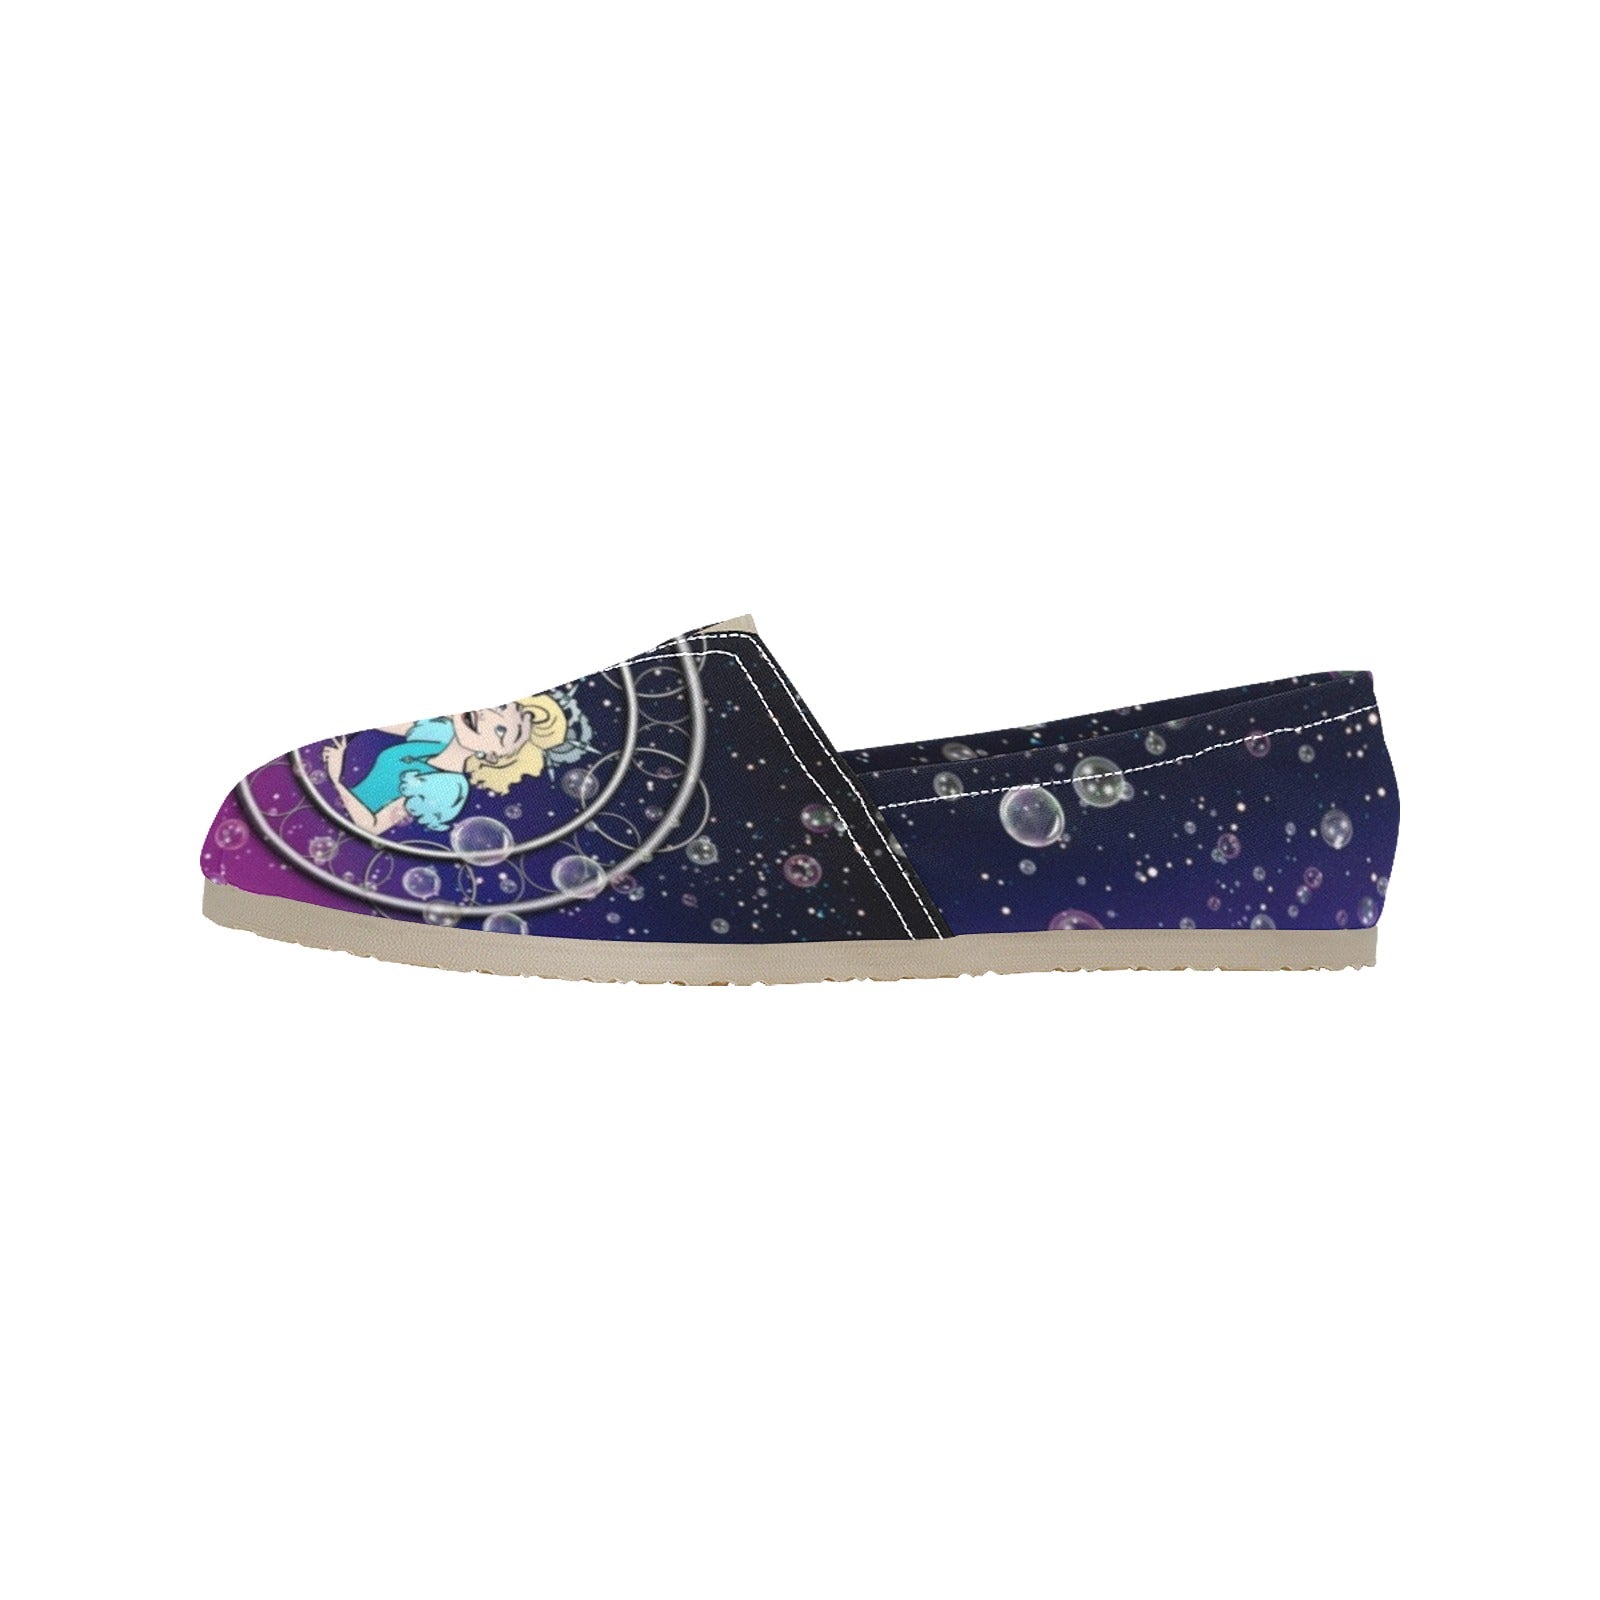 Good Witch - Casual Canvas Slip-on Shoes